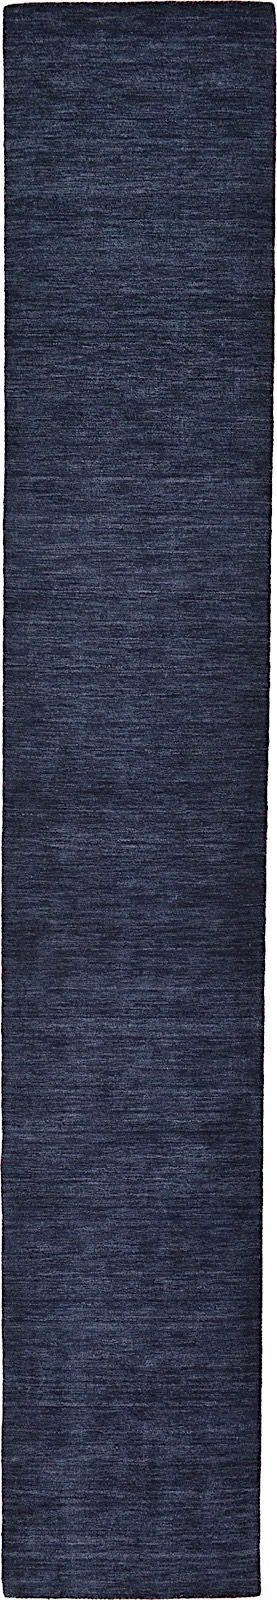 rugpal shiva solid/striped area rug collection